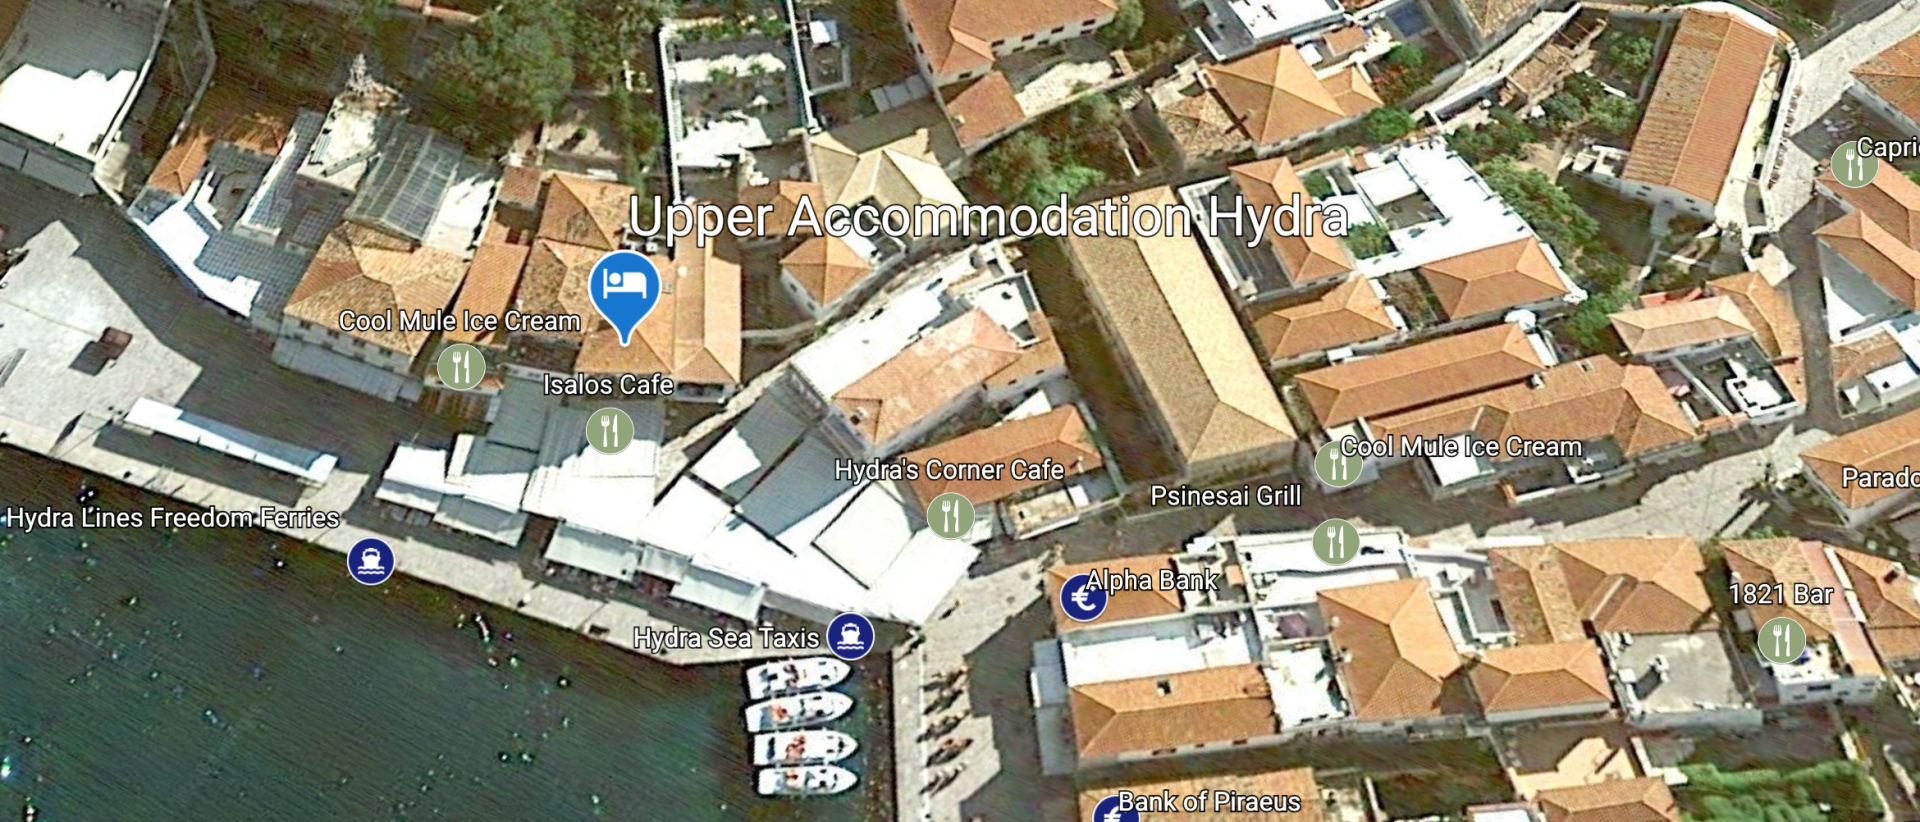 Map showing the location of the Upper Accommodation Guest House on the Greek Island of Hydra